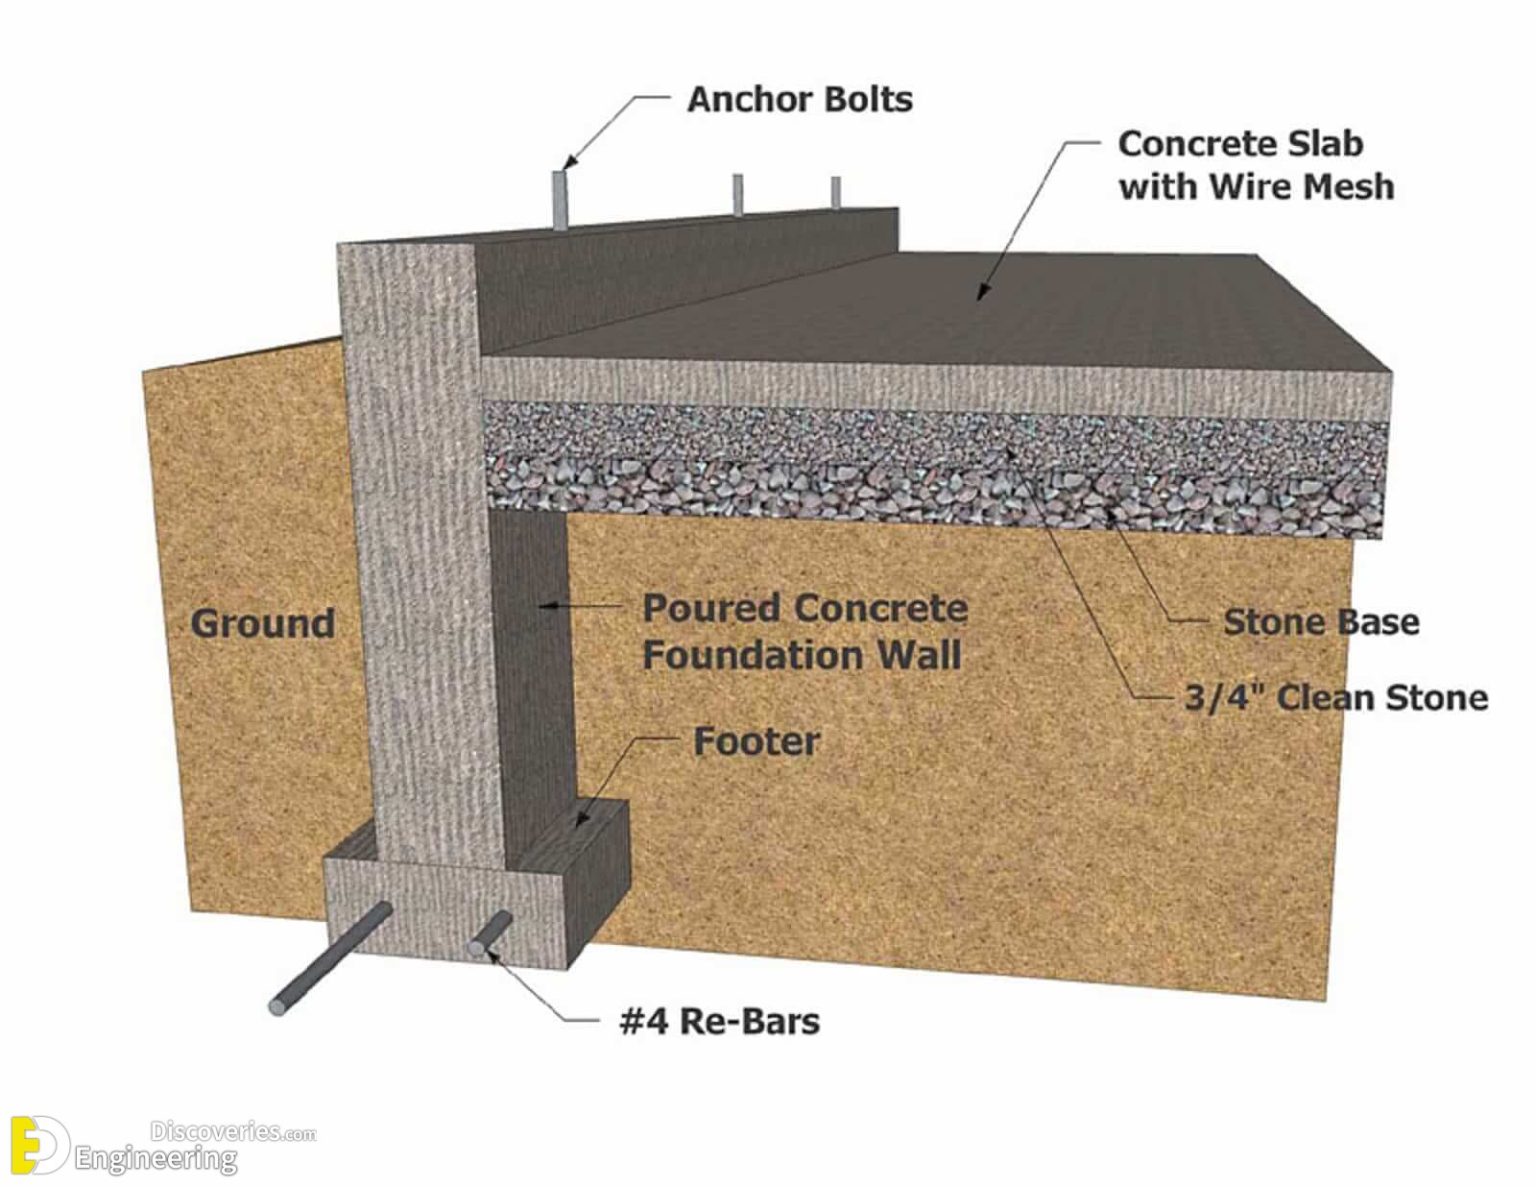 3 Types Of Concrete Foundations - Engineering Discoveries